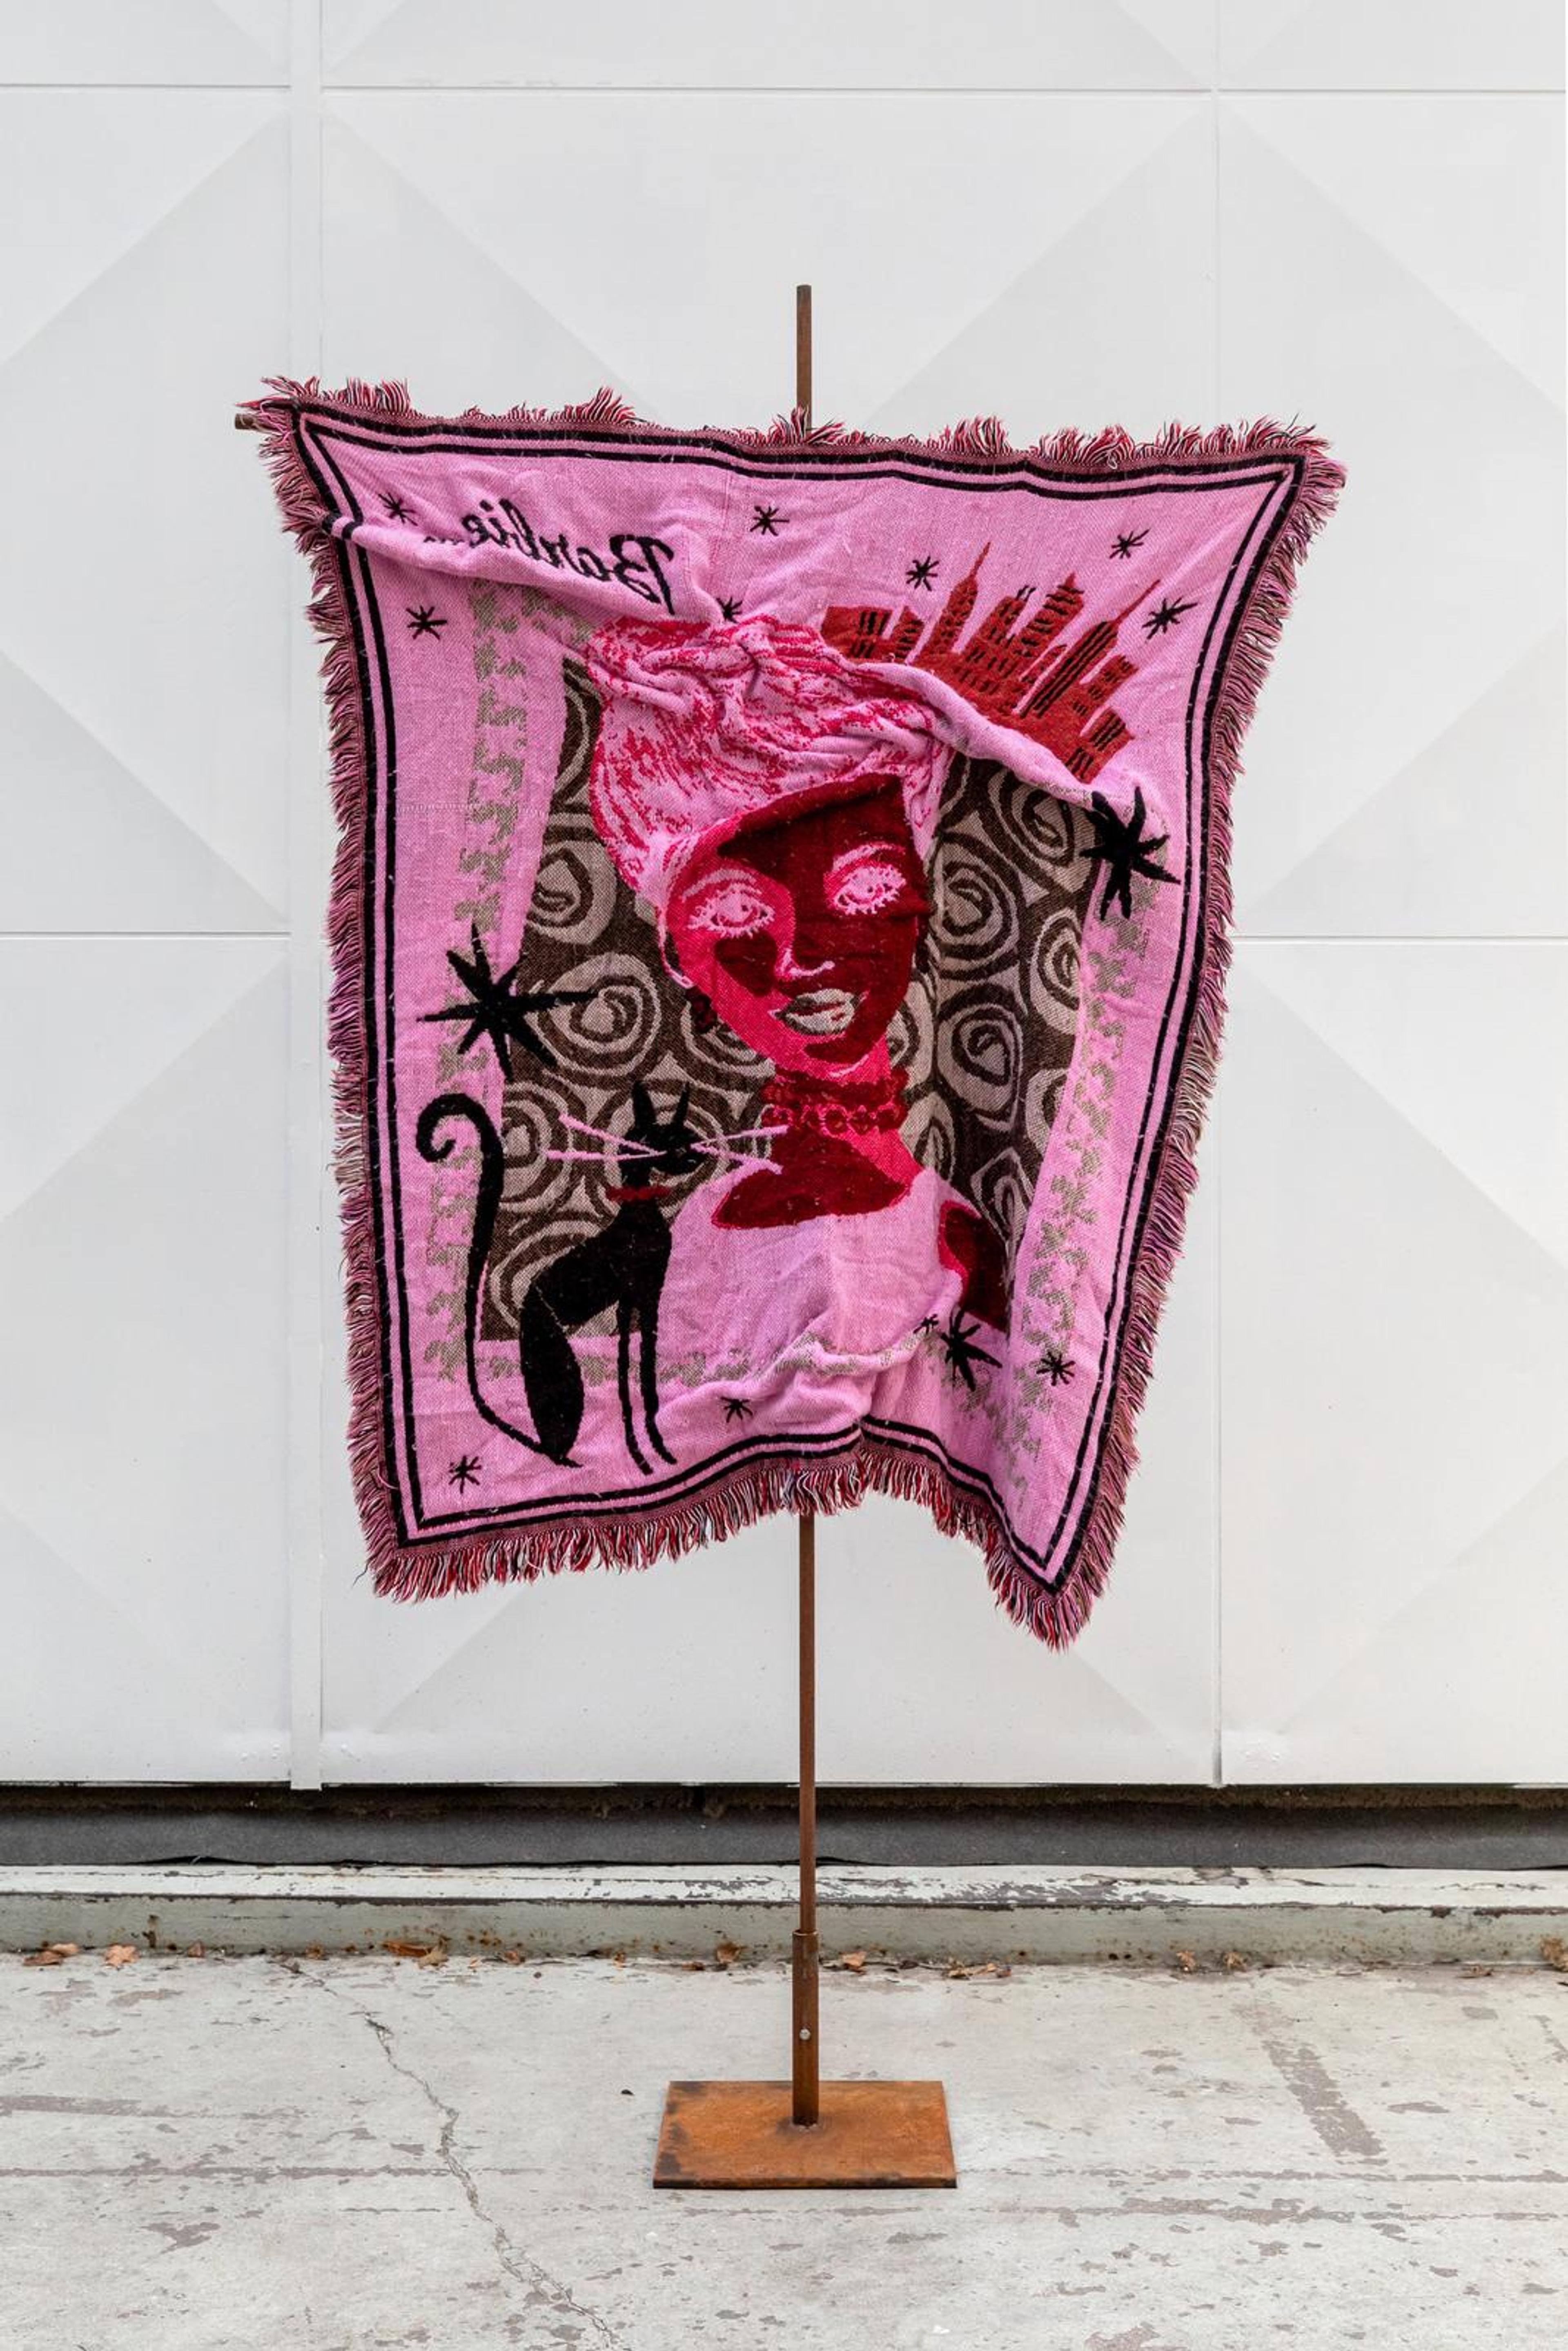 Rhea Dillon, Golgotha , 2020, thread on Barbie blanket mounted on rusted steel cross, 196 &times; 120 &times; 30 cm, London. Courtesy: the artist and Soft Opening, London. Photo: Dijby Kebe